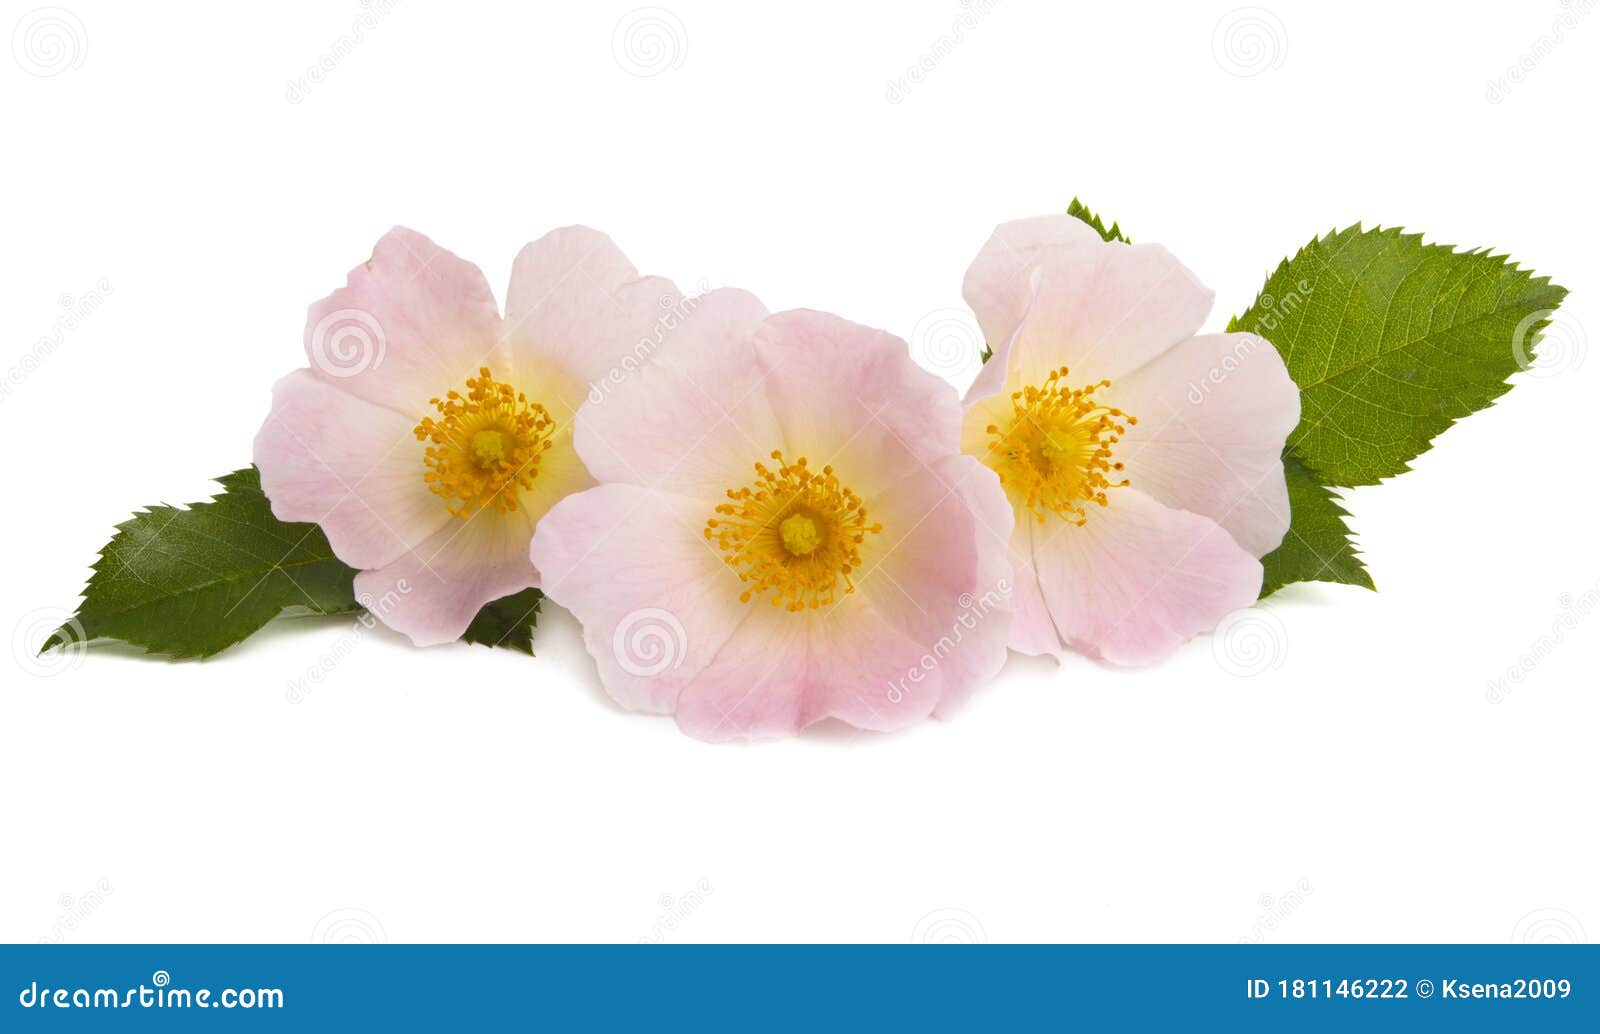 Rosehip rose isolated stock photo. Image of floral, background - 181146222